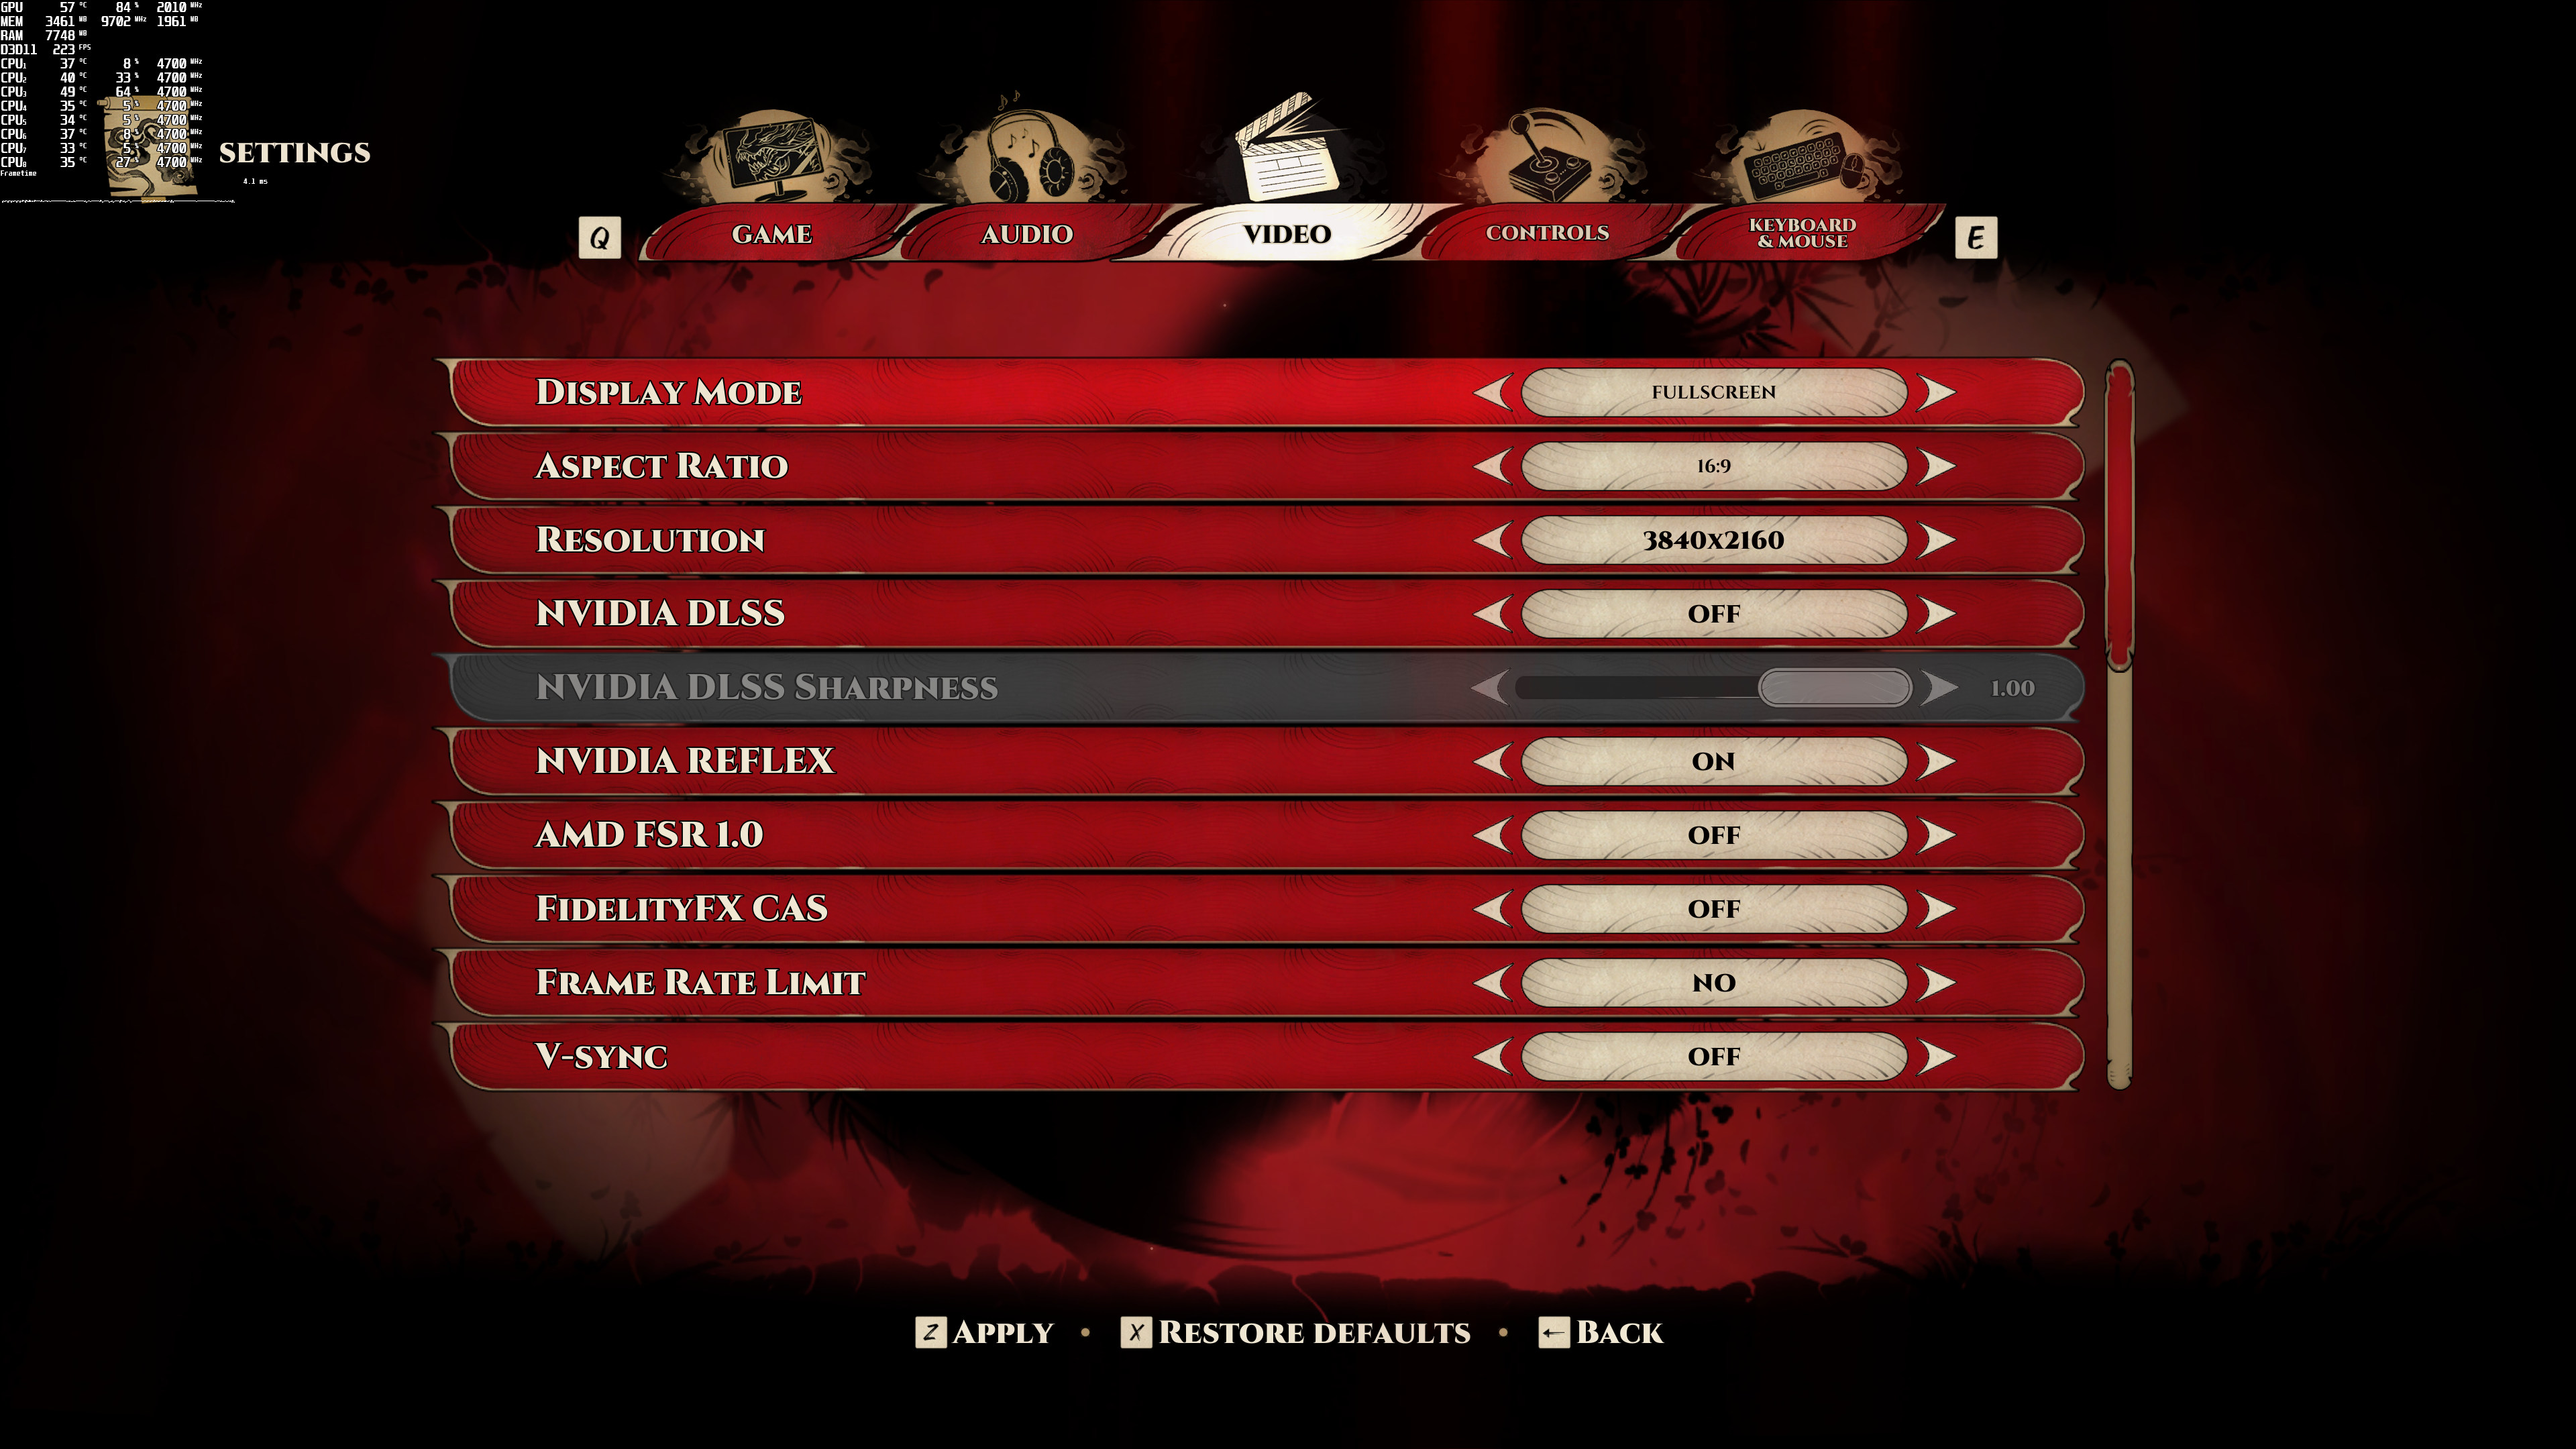 Shadow Warrior 3 System Requirements - Can I Run It? - PCGameBenchmark